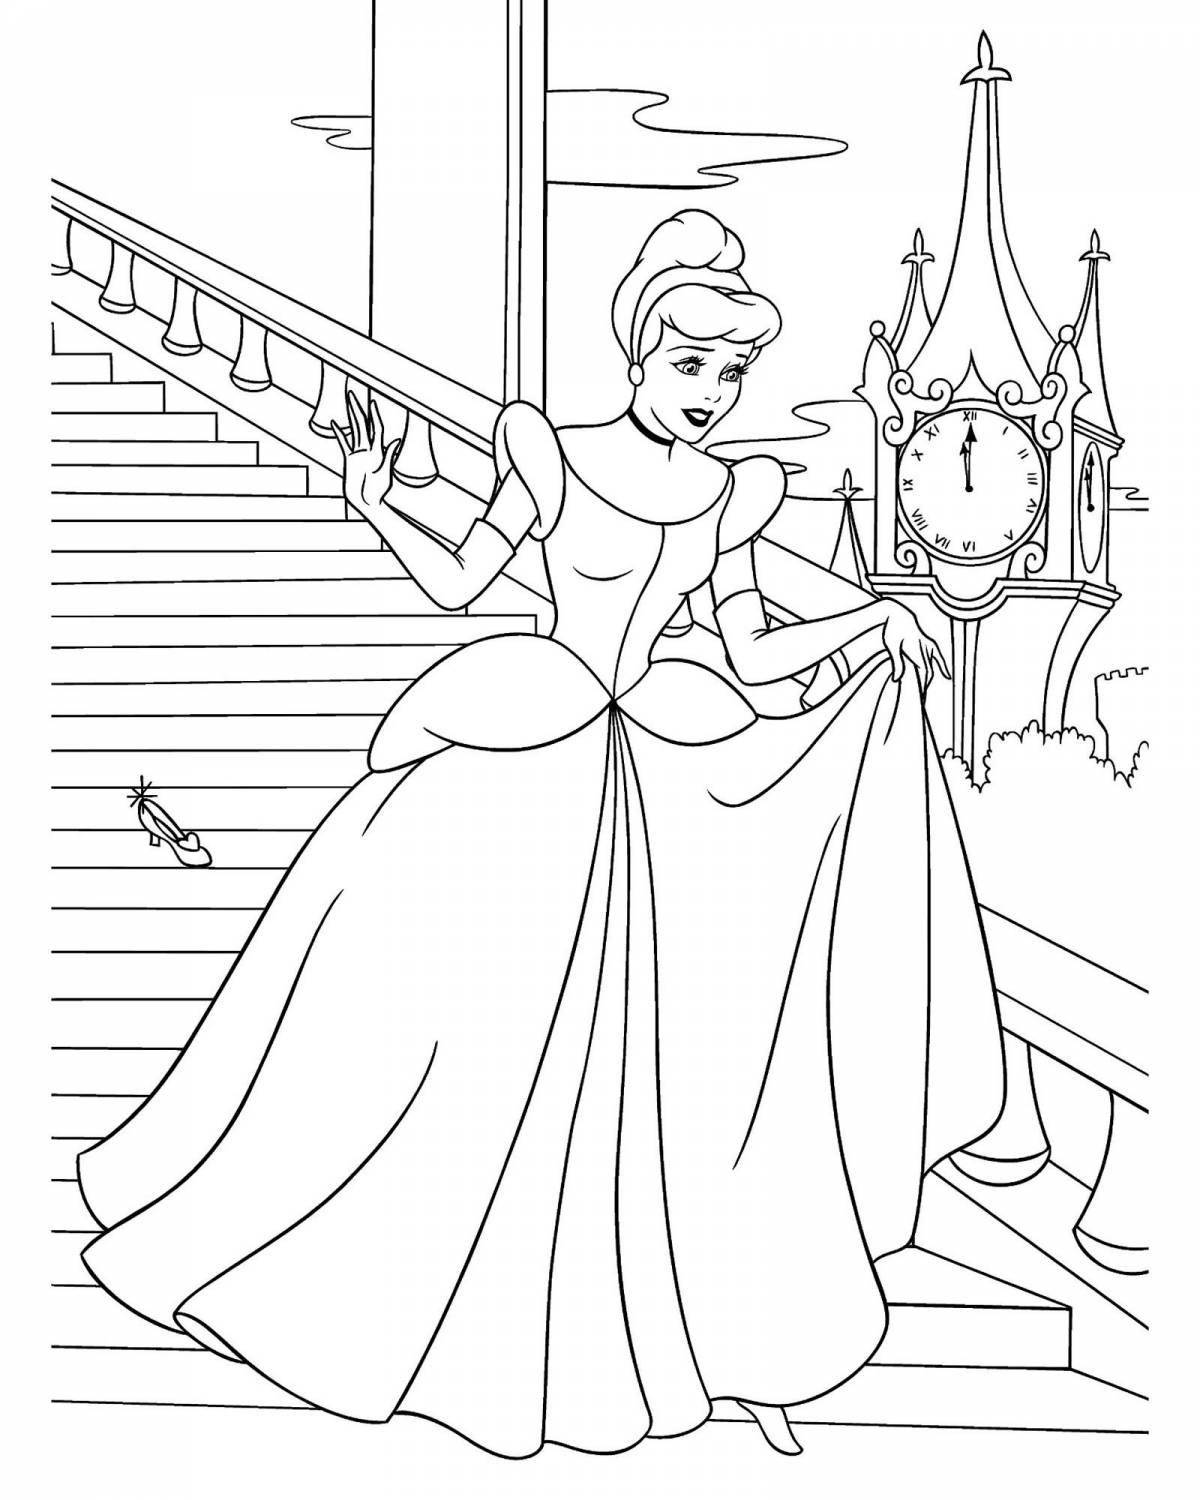 Shiny Cinderella coloring pages for kids